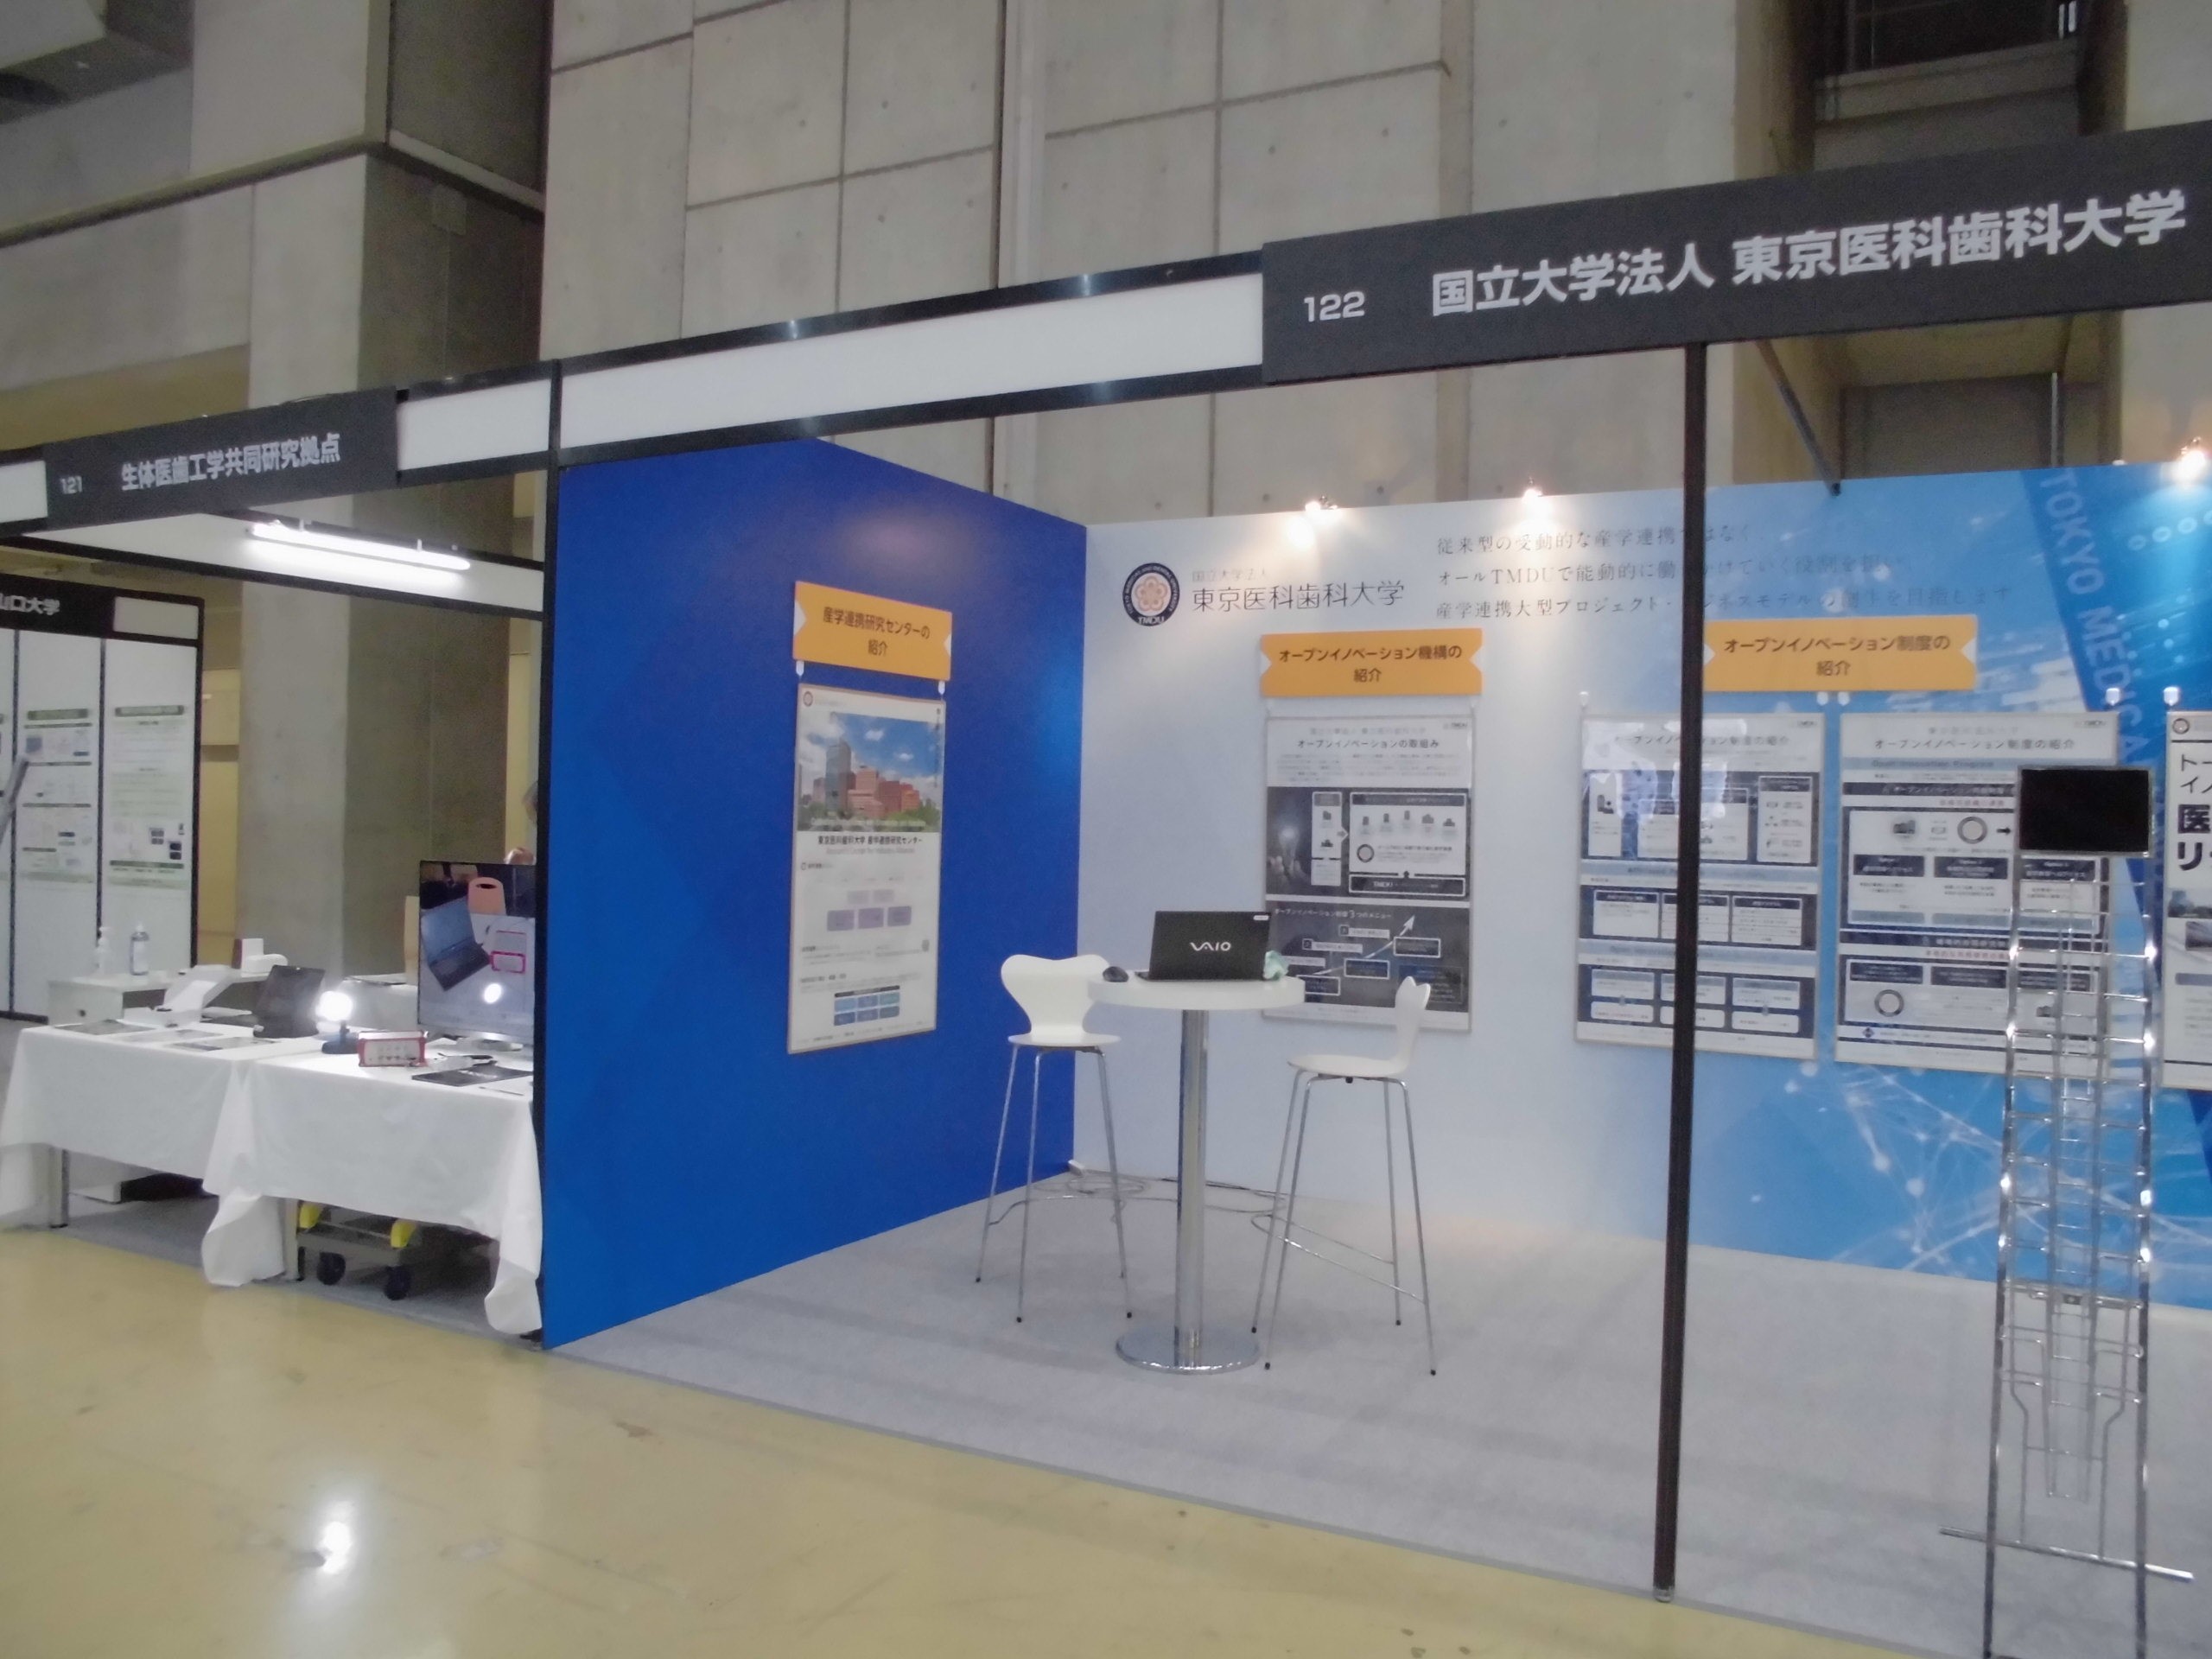 Exhibition booth of TMDU.